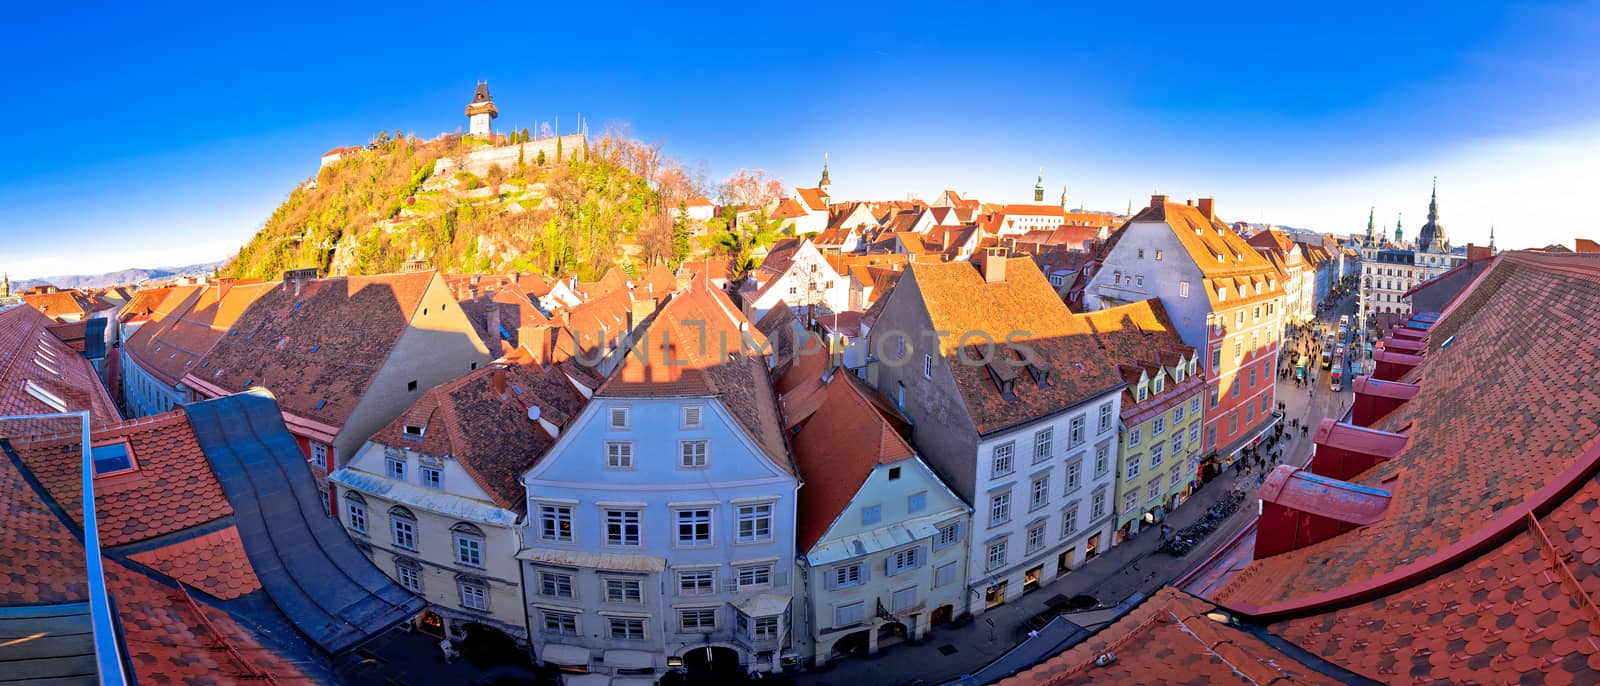 Graz cityscape and Schlossberg panoramic view by xbrchx